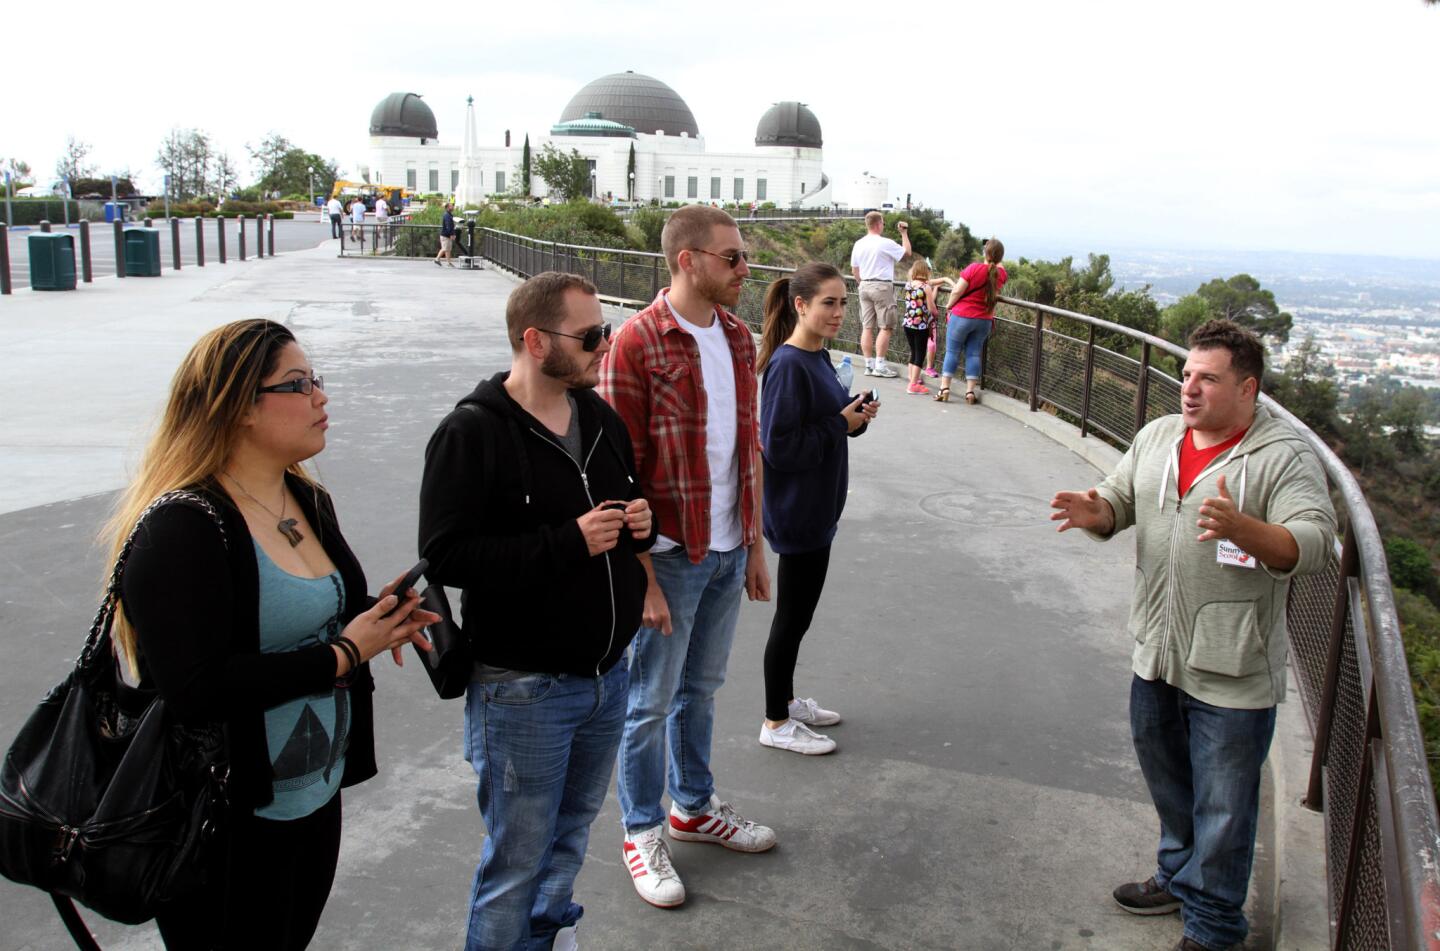 Company co-owner Michael Hunter, right, talks about the history of the Hollywood sign and the Griffith Observatory during a three-hour, Red Carpet tour offered by Burbank-based Sunnyday Scoot on Friday, June 5, 2015.